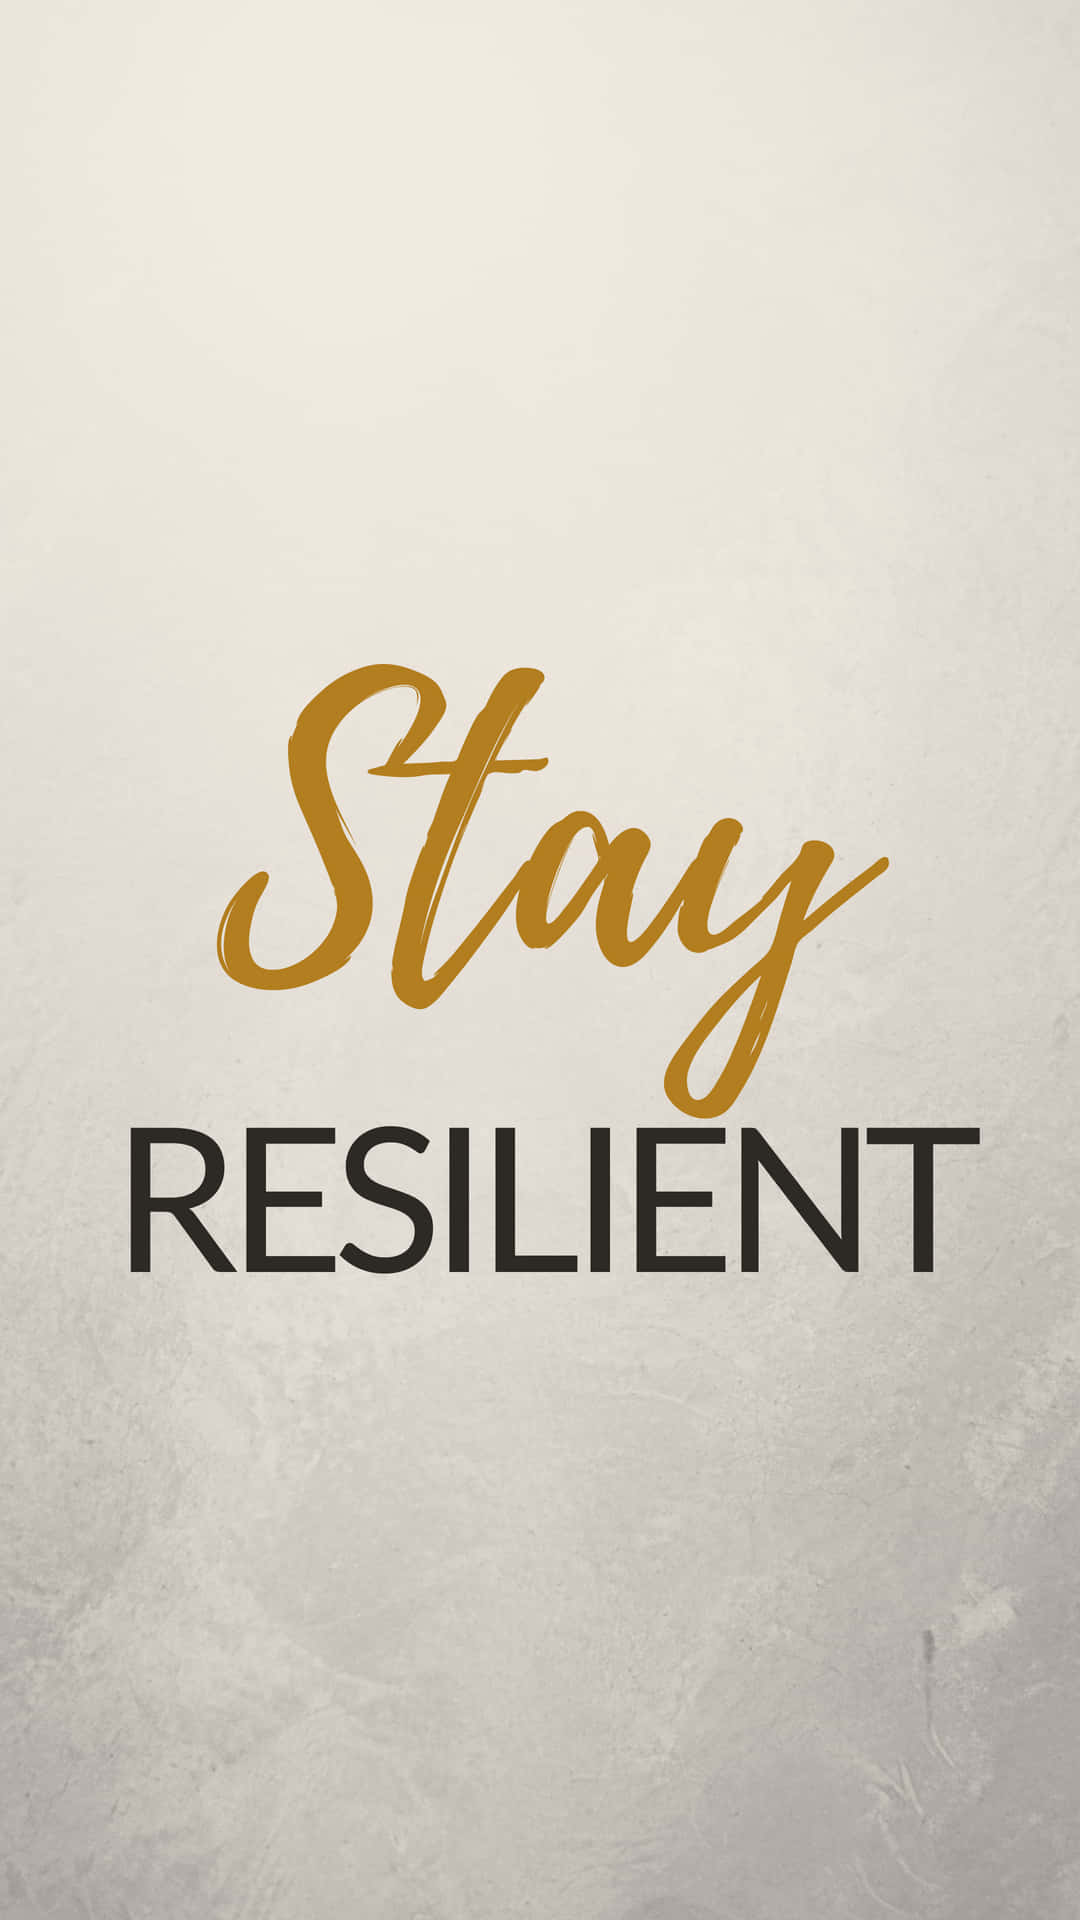 Stay Resilient Reminder Wallpaper